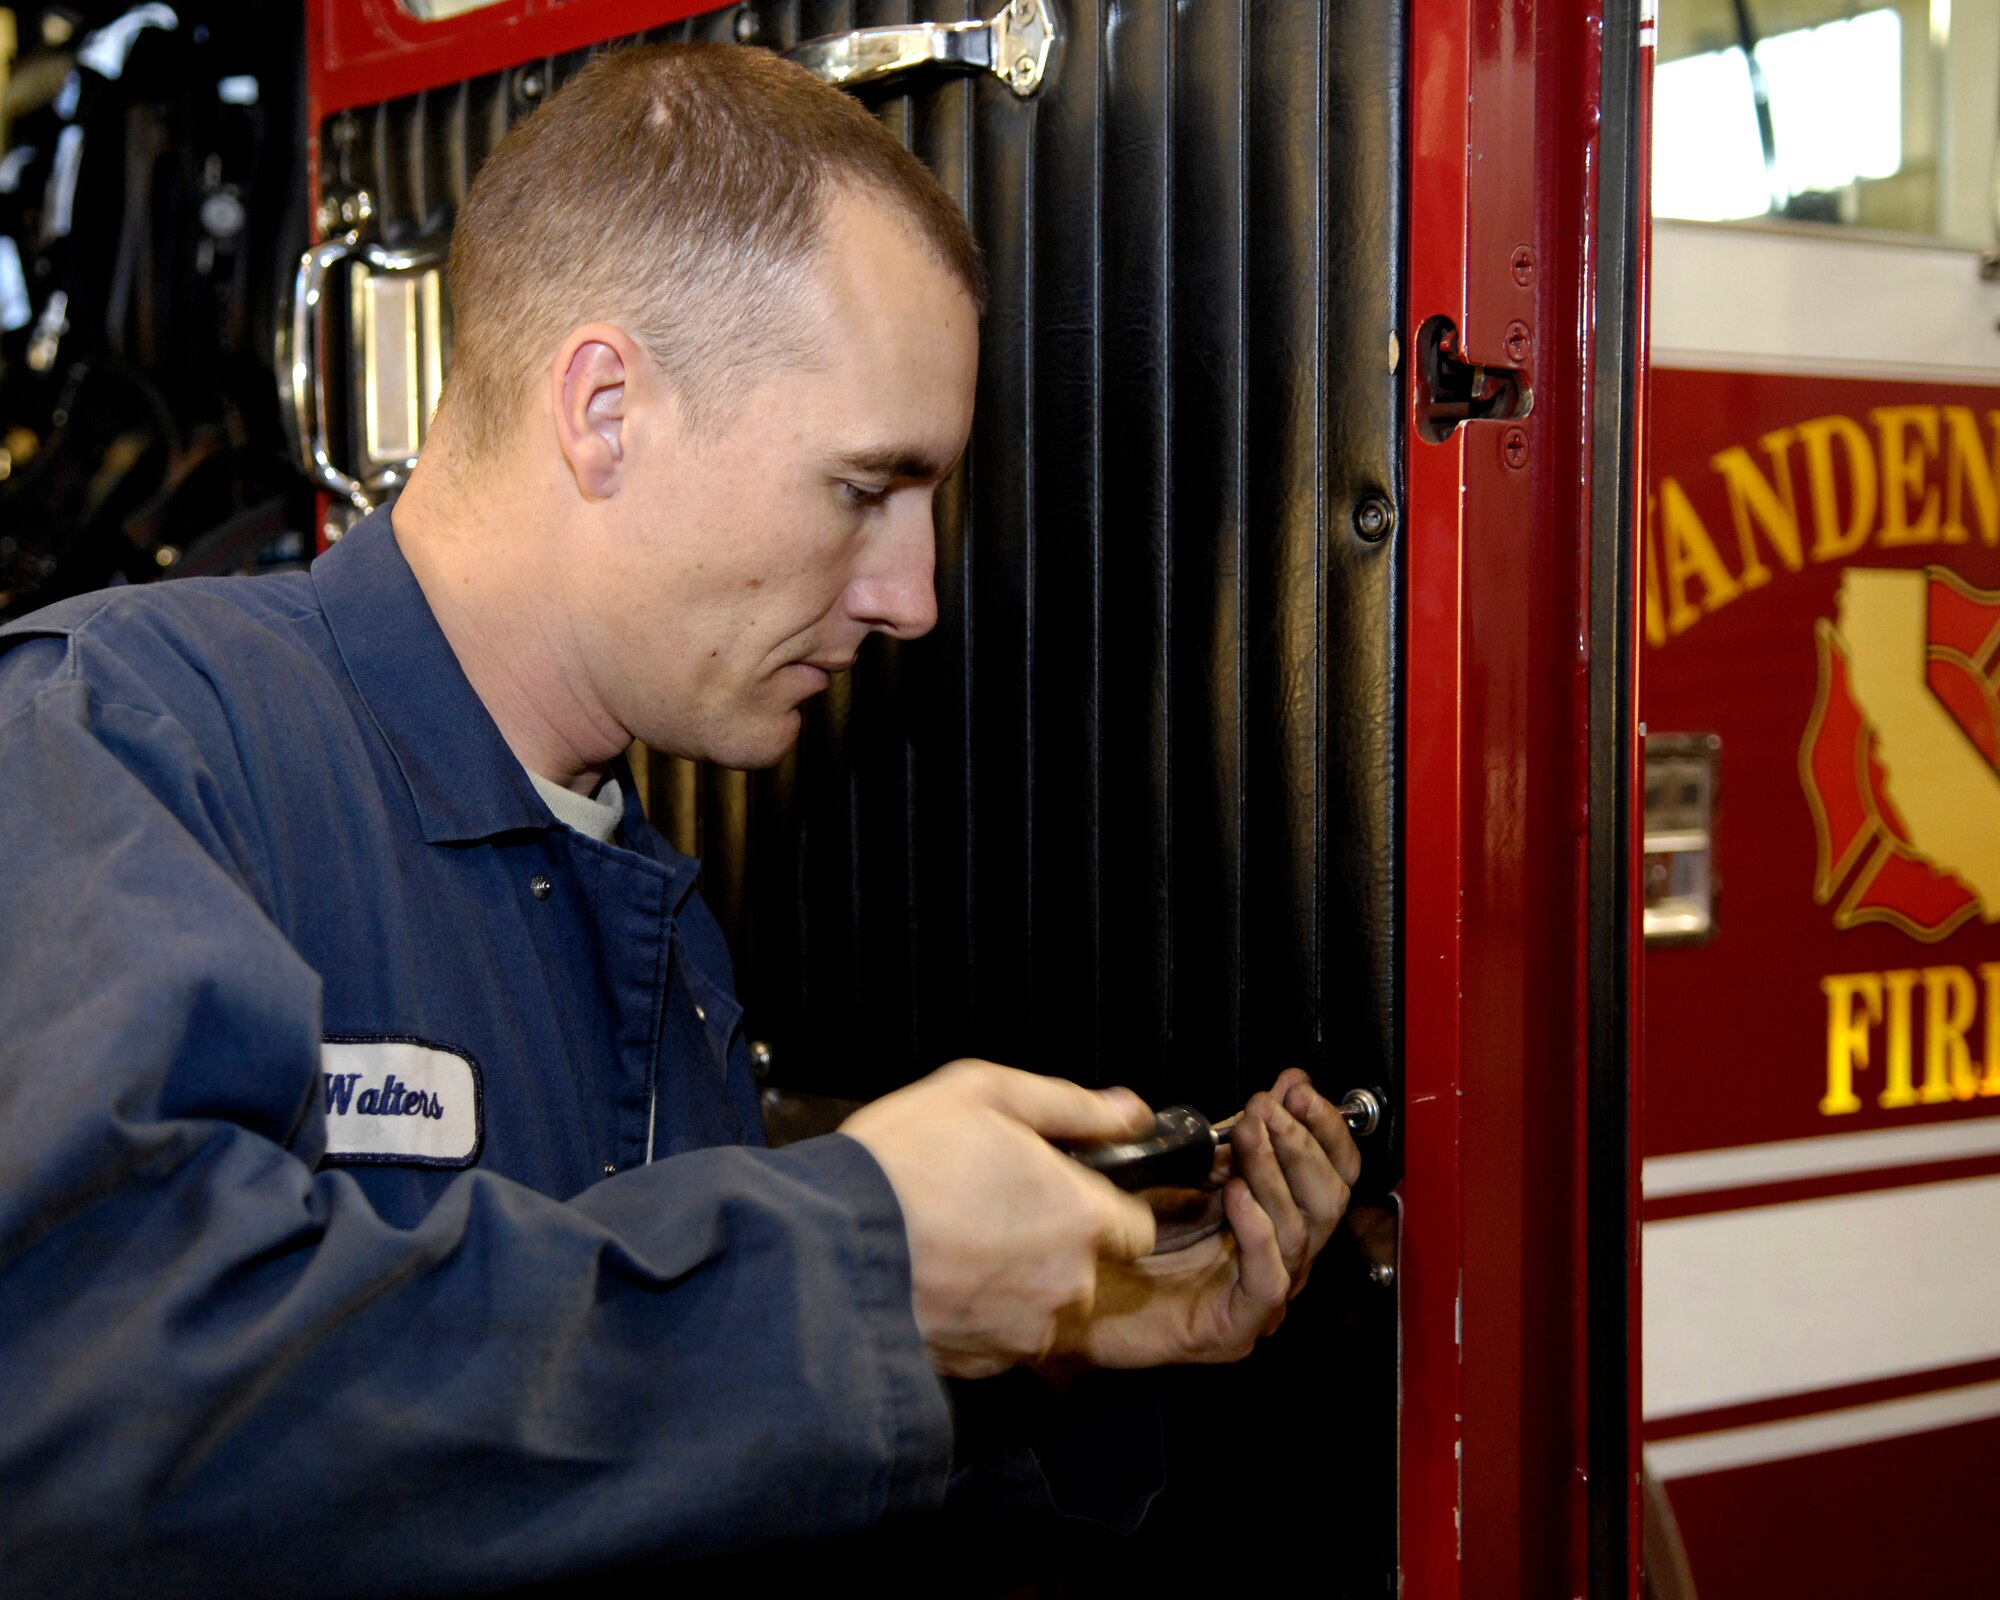 VANDENBERG AIR FORCE BASE, Calif. -- Staff Sgt. Jason Walters, 30th Logistics Readiness Squadron, screws a door panel to a fire engine on Dec. 5.  Staff Sgt. Walters recently returned from convoy duty in Iraq while stationed at Camp Arifjan, Kuwait. (U.S. Air Force photo/Airman 1st Class Jonathan Olds)
